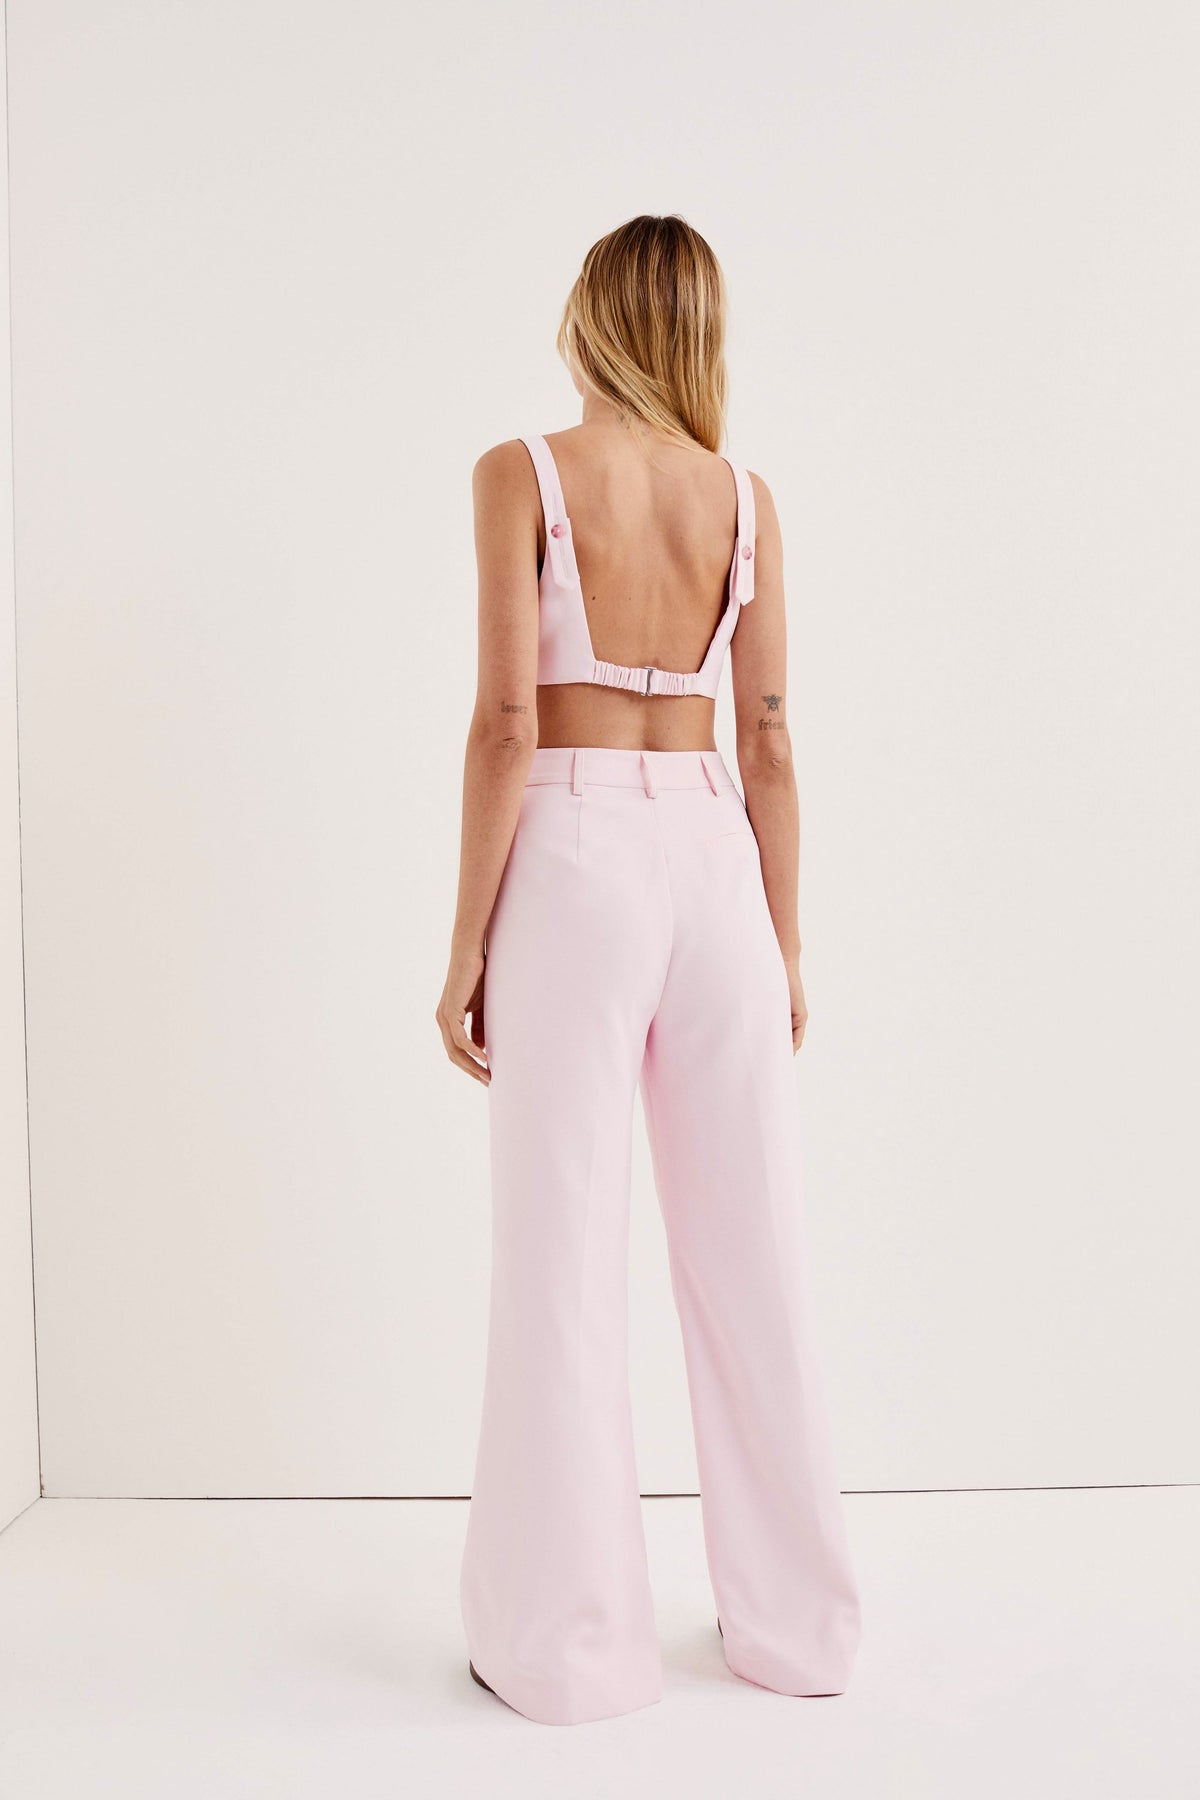 For Love and Lemons Shannon Crop Top